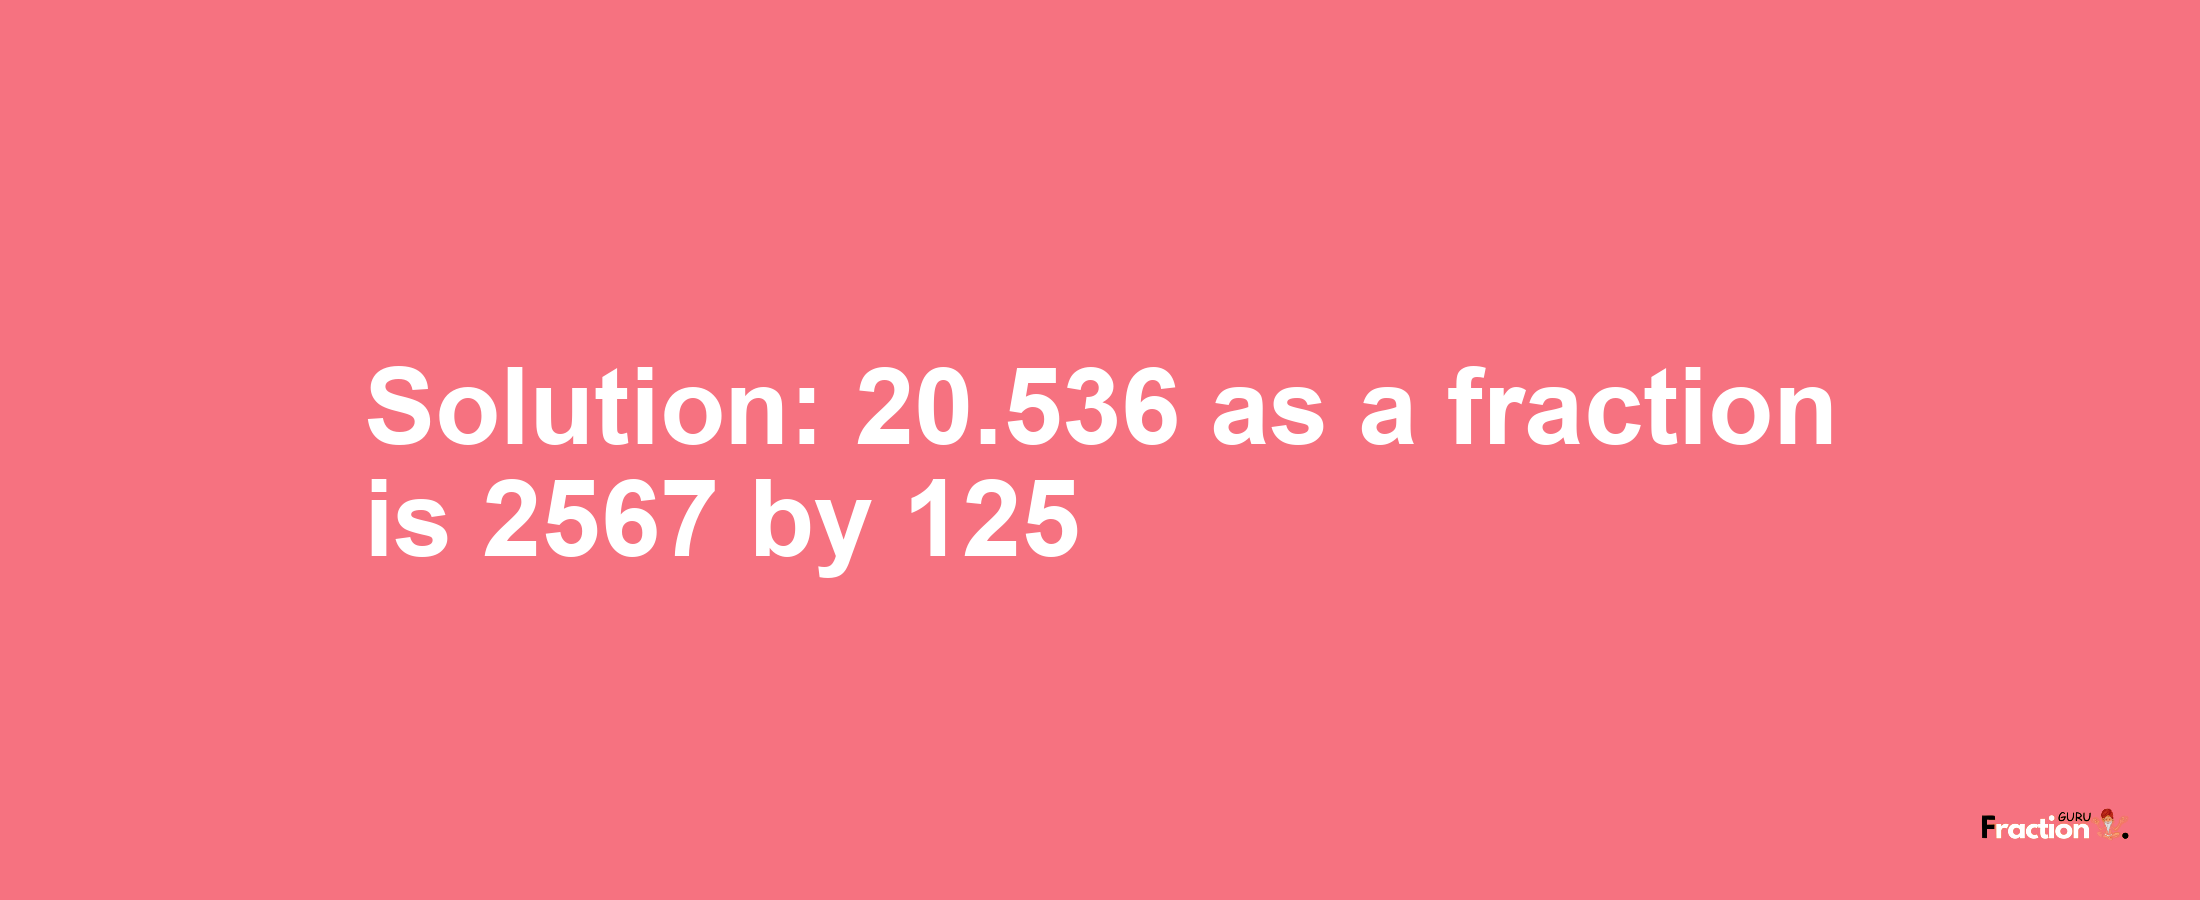 Solution:20.536 as a fraction is 2567/125